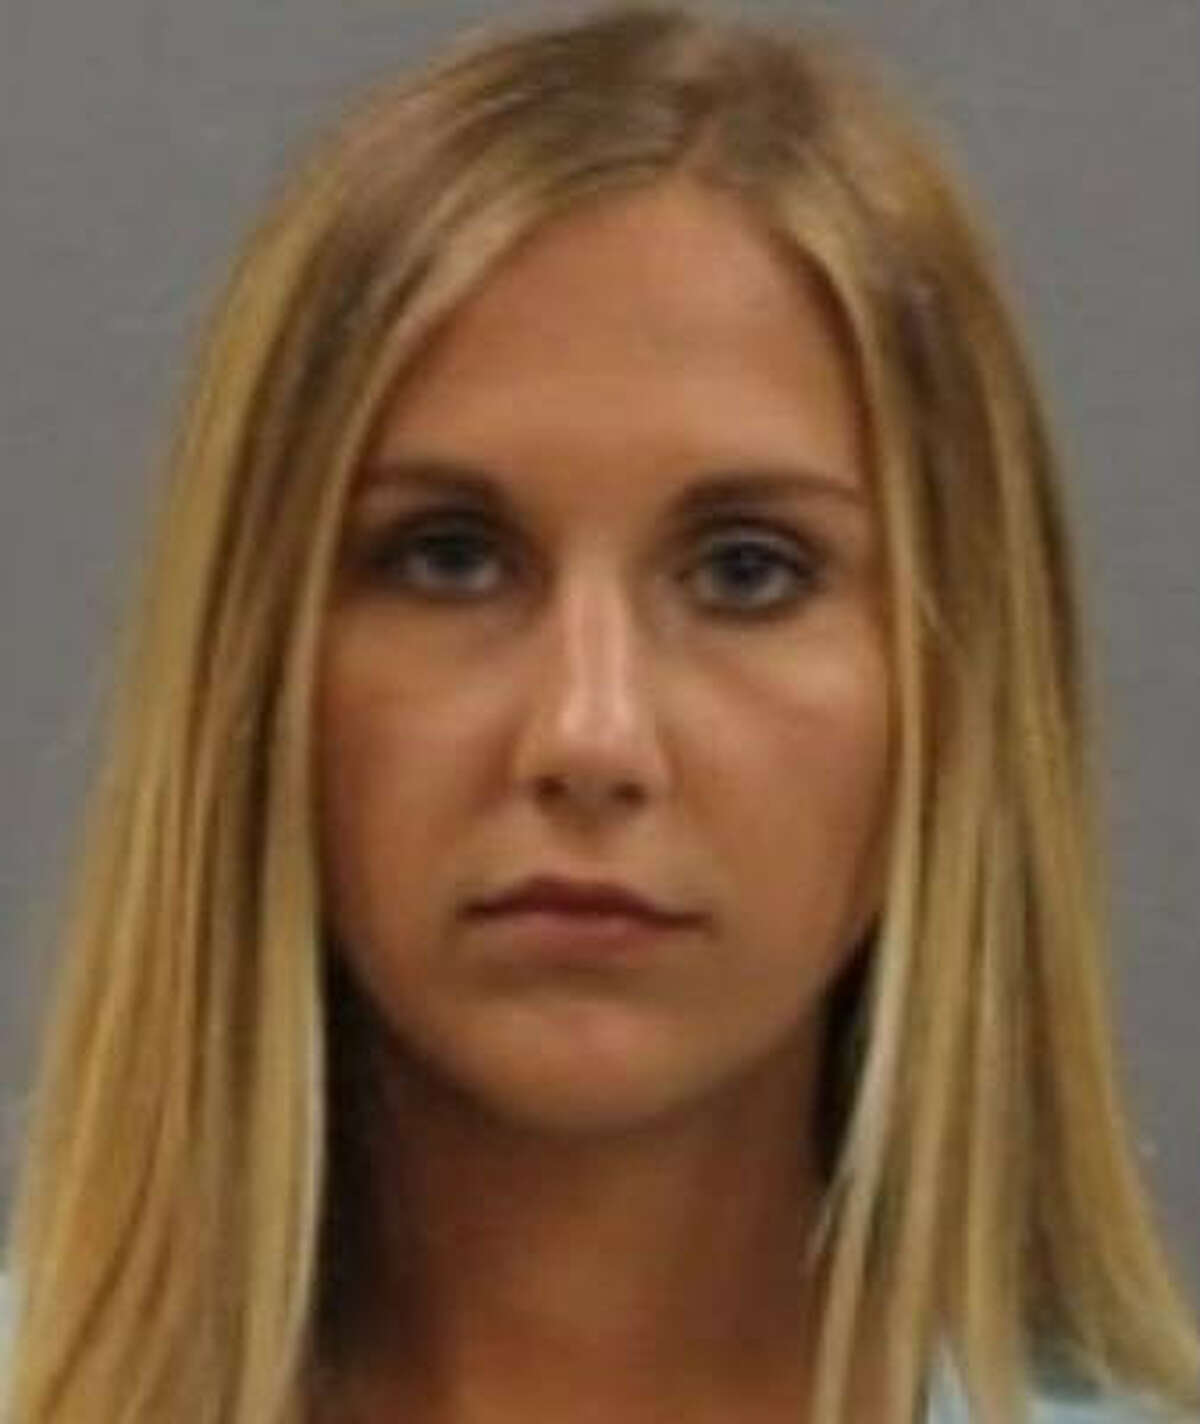 Ex-substitute teacher, 24, allegedly had sex with 17-year-old student multiple times